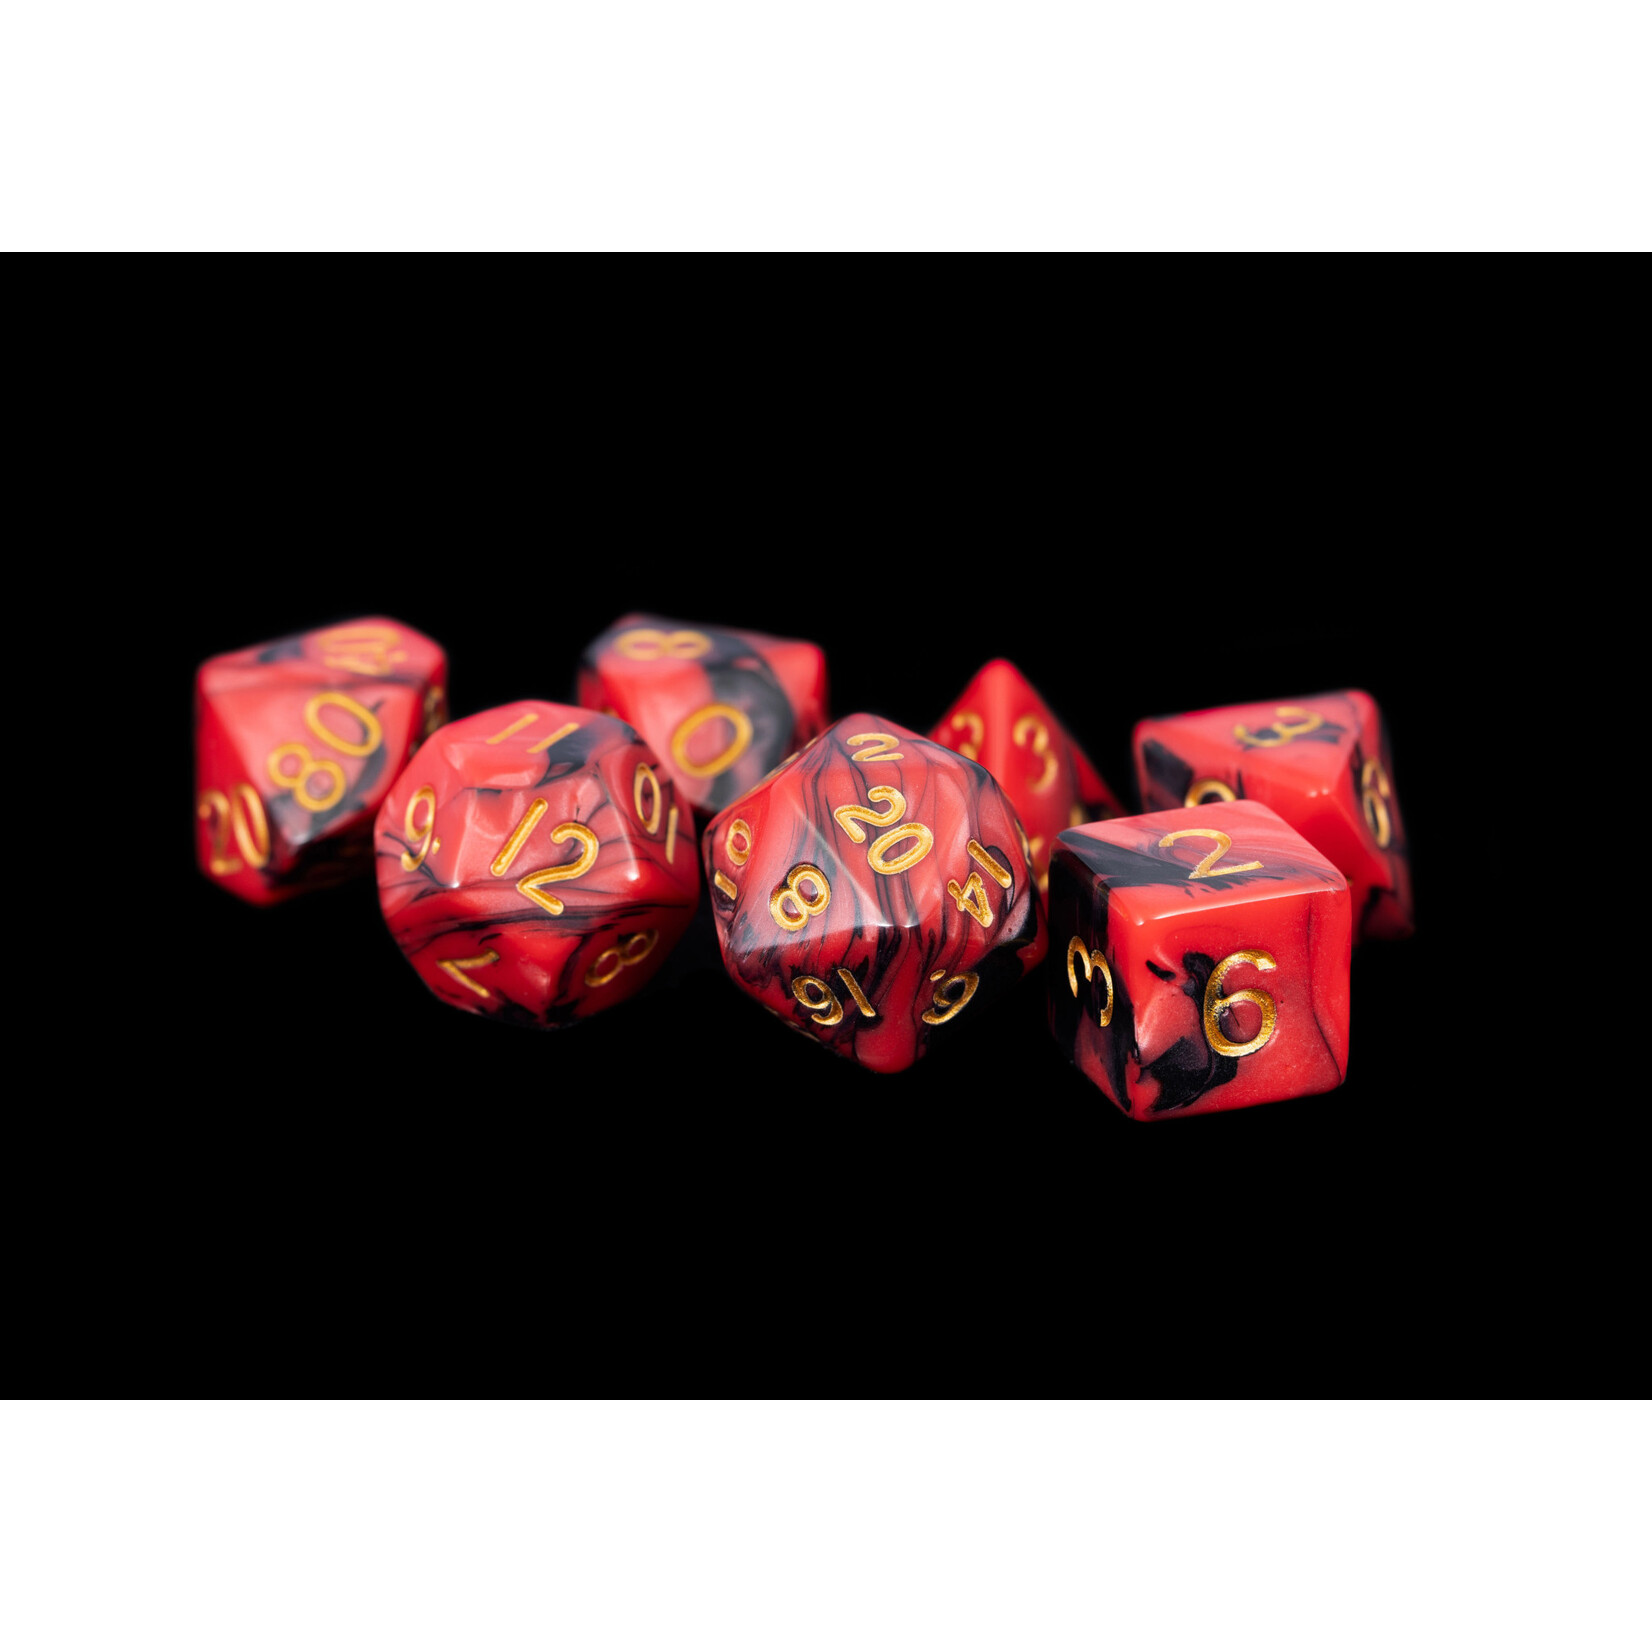 FanRoll Dice RPG 113 7pc Red/Black with Gold